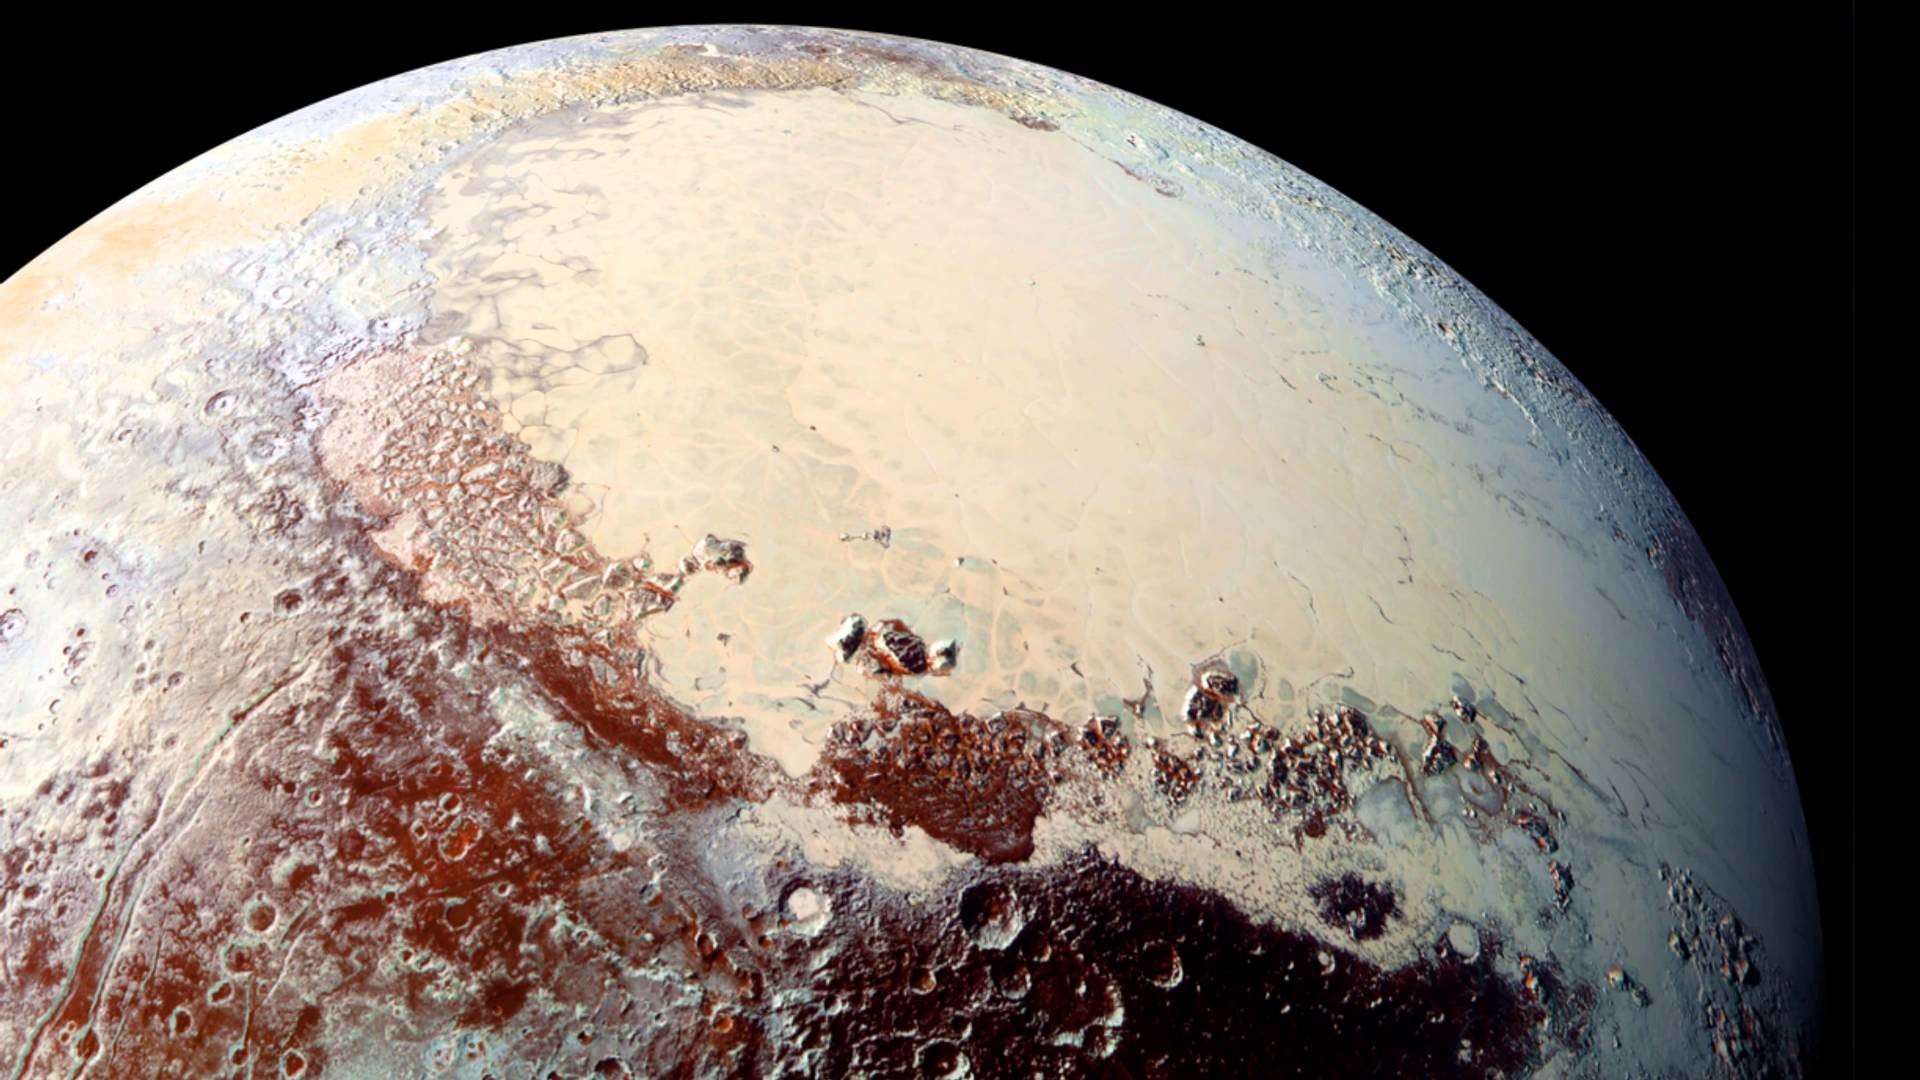 Pluto and Charon in NASA images (4K update)